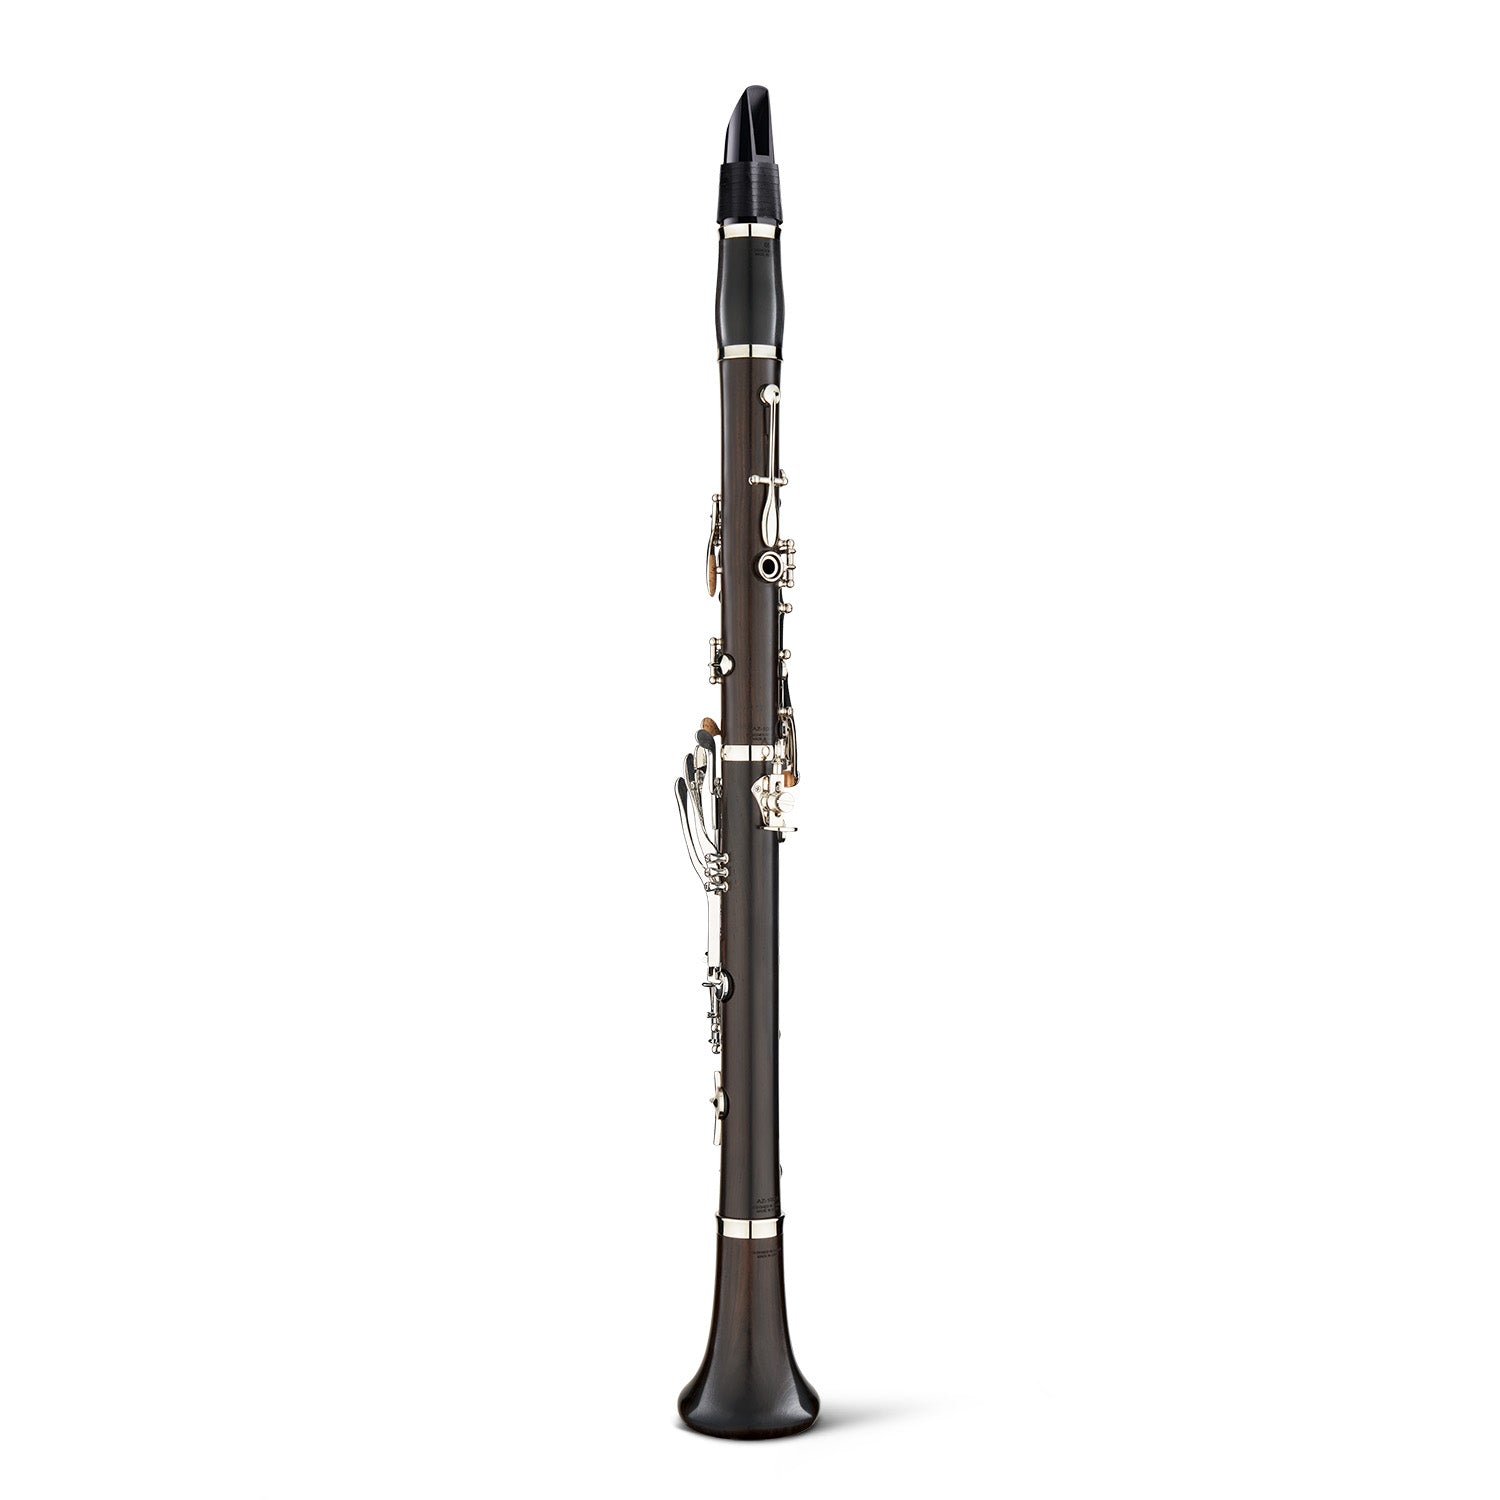 backun-bb-clarinet-alpha-plus-silver-with-eb-key-with-protege-mouthpiece-and-rovner-back